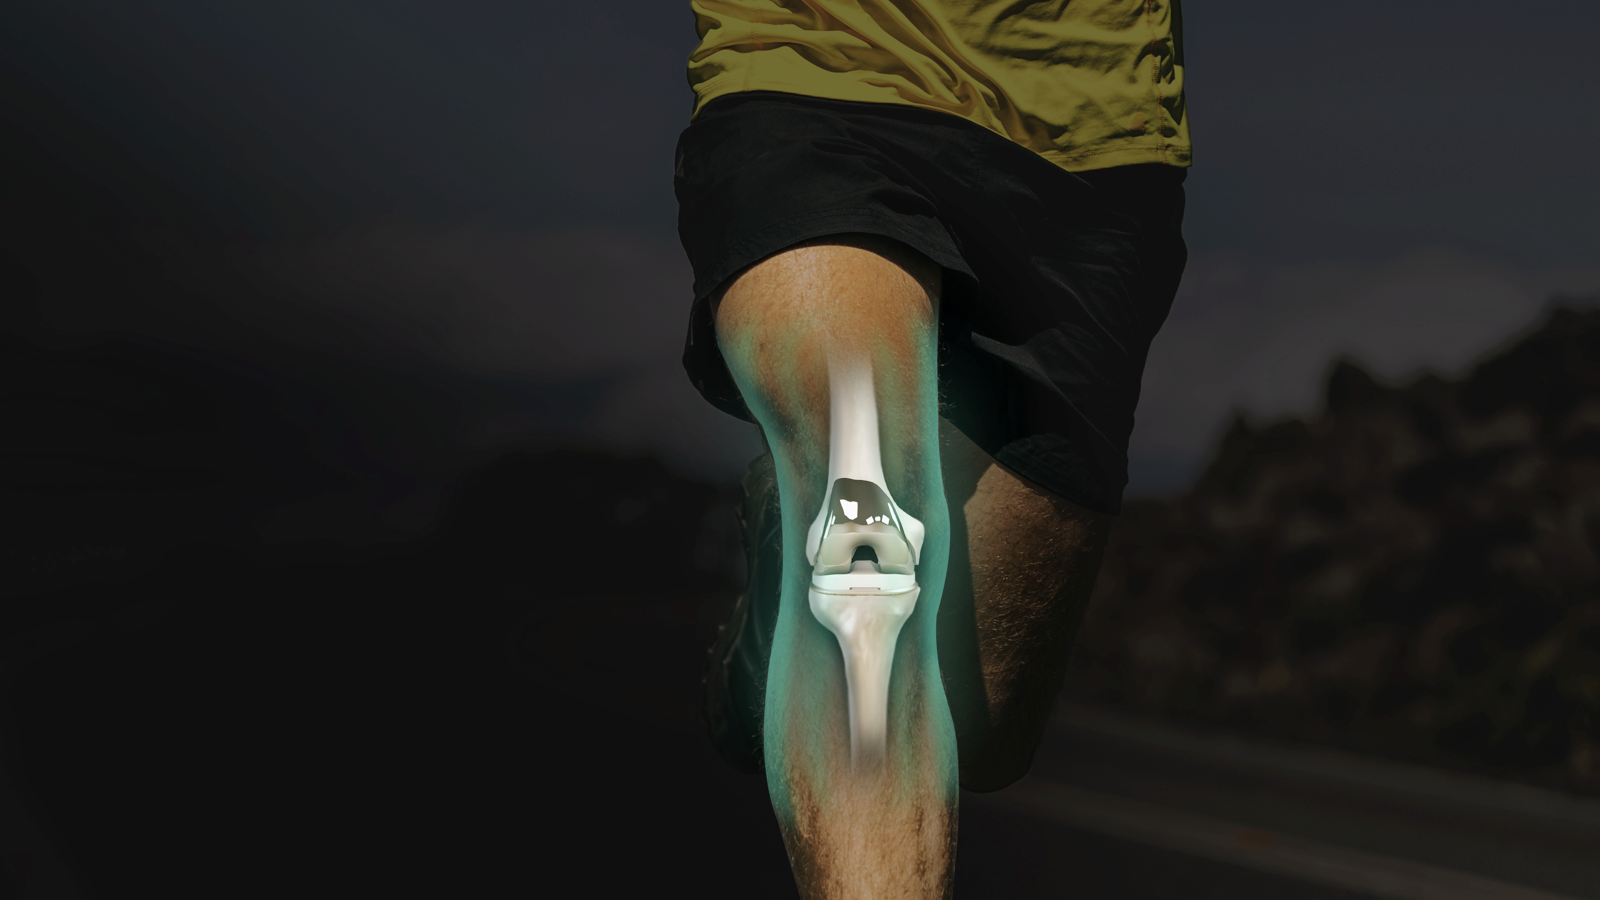 Man running with x-ray effect on leg showing knee replacement.